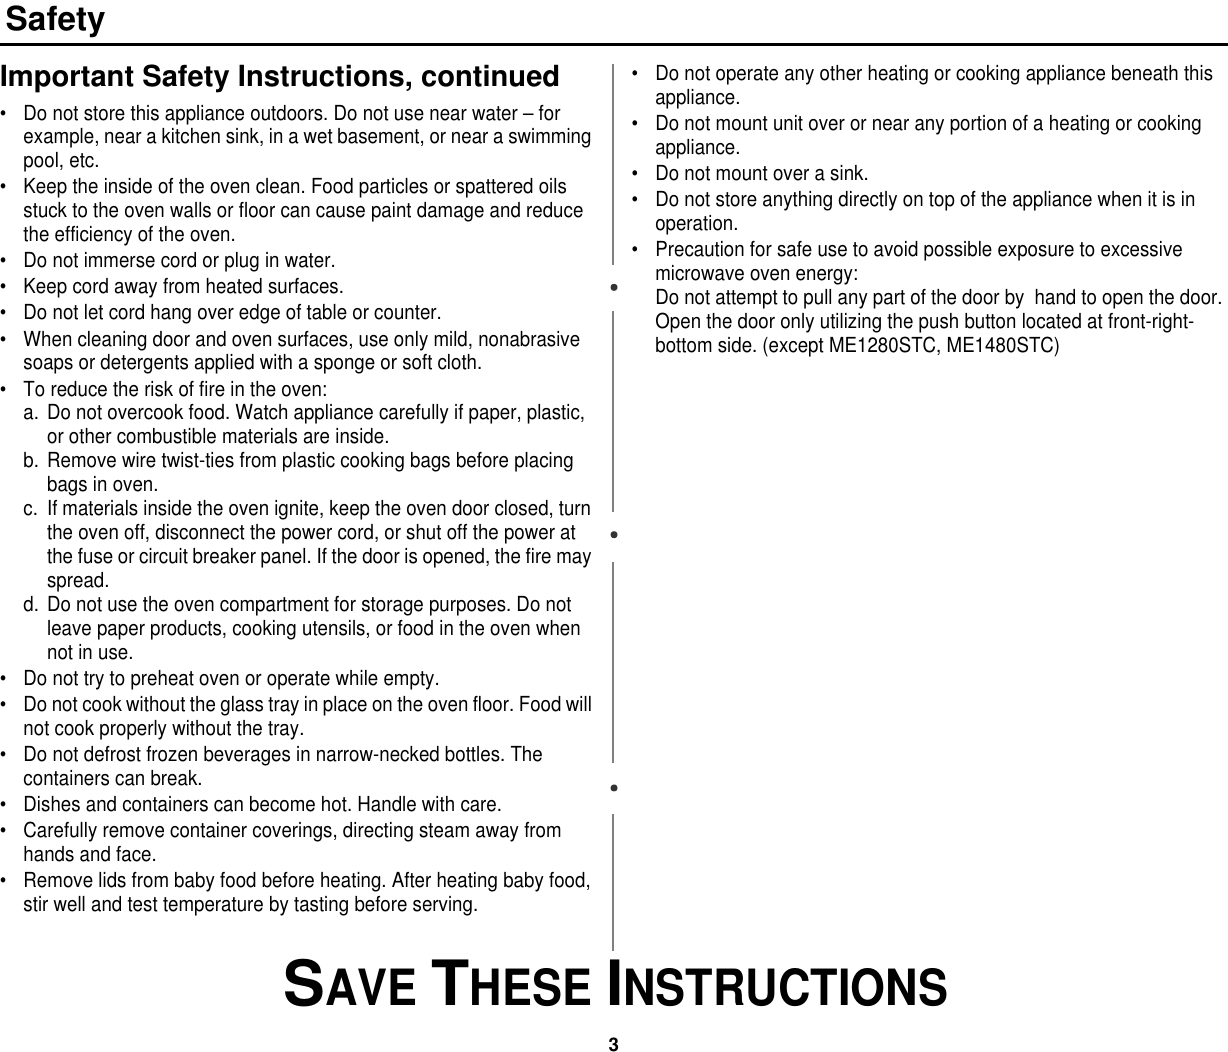 3 SAVE THESE INSTRUCTIONSSafetyImportant Safety Instructions, continued• Do not store this appliance outdoors. Do not use near water – for example, near a kitchen sink, in a wet basement, or near a swimming pool, etc. • Keep the inside of the oven clean. Food particles or spattered oils stuck to the oven walls or floor can cause paint damage and reduce the efficiency of the oven.• Do not immerse cord or plug in water.• Keep cord away from heated surfaces.• Do not let cord hang over edge of table or counter.• When cleaning door and oven surfaces, use only mild, nonabrasive soaps or detergents applied with a sponge or soft cloth.• To reduce the risk of fire in the oven:a. Do not overcook food. Watch appliance carefully if paper, plastic, or other combustible materials are inside.b. Remove wire twist-ties from plastic cooking bags before placing bags in oven.c. If materials inside the oven ignite, keep the oven door closed, turn the oven off, disconnect the power cord, or shut off the power at the fuse or circuit breaker panel. If the door is opened, the fire may spread.d. Do not use the oven compartment for storage purposes. Do not leave paper products, cooking utensils, or food in the oven when not in use.• Do not try to preheat oven or operate while empty.• Do not cook without the glass tray in place on the oven floor. Food will not cook properly without the tray.• Do not defrost frozen beverages in narrow-necked bottles. The containers can break.• Dishes and containers can become hot. Handle with care.• Carefully remove container coverings, directing steam away from hands and face.• Remove lids from baby food before heating. After heating baby food, stir well and test temperature by tasting before serving.• Do not operate any other heating or cooking appliance beneath this appliance.• Do not mount unit over or near any portion of a heating or cooking appliance.• Do not mount over a sink.• Do not store anything directly on top of the appliance when it is in operation.• Precaution for safe use to avoid possible exposure to excessive microwave oven energy:Do not attempt to pull any part of the door by  hand to open the door. Open the door only utilizing the push button located at front-right-bottom side. (except ME1280STC, ME1480STC)